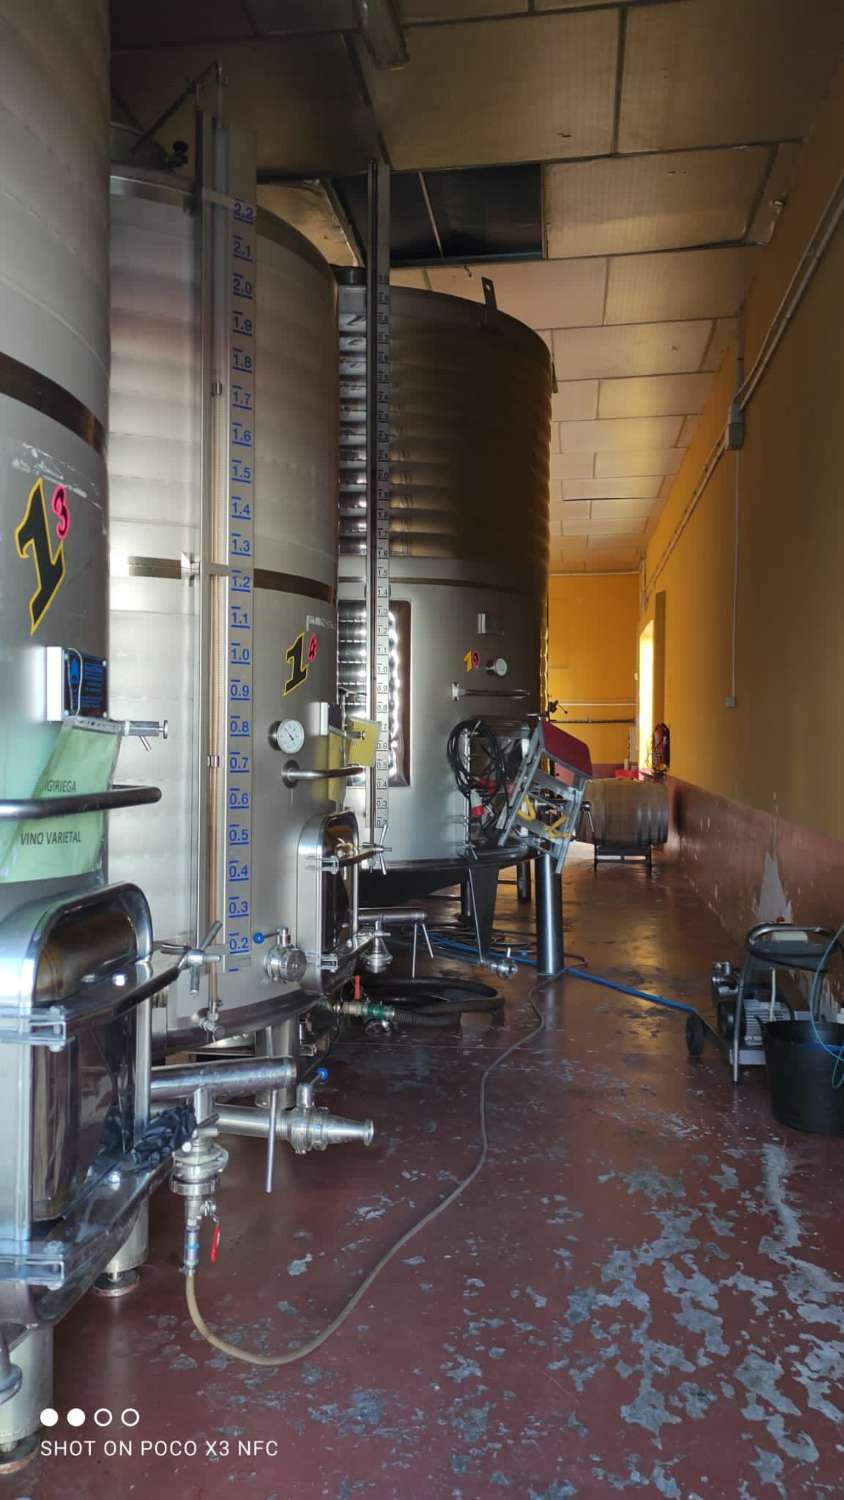 Winery and vineyards in operation